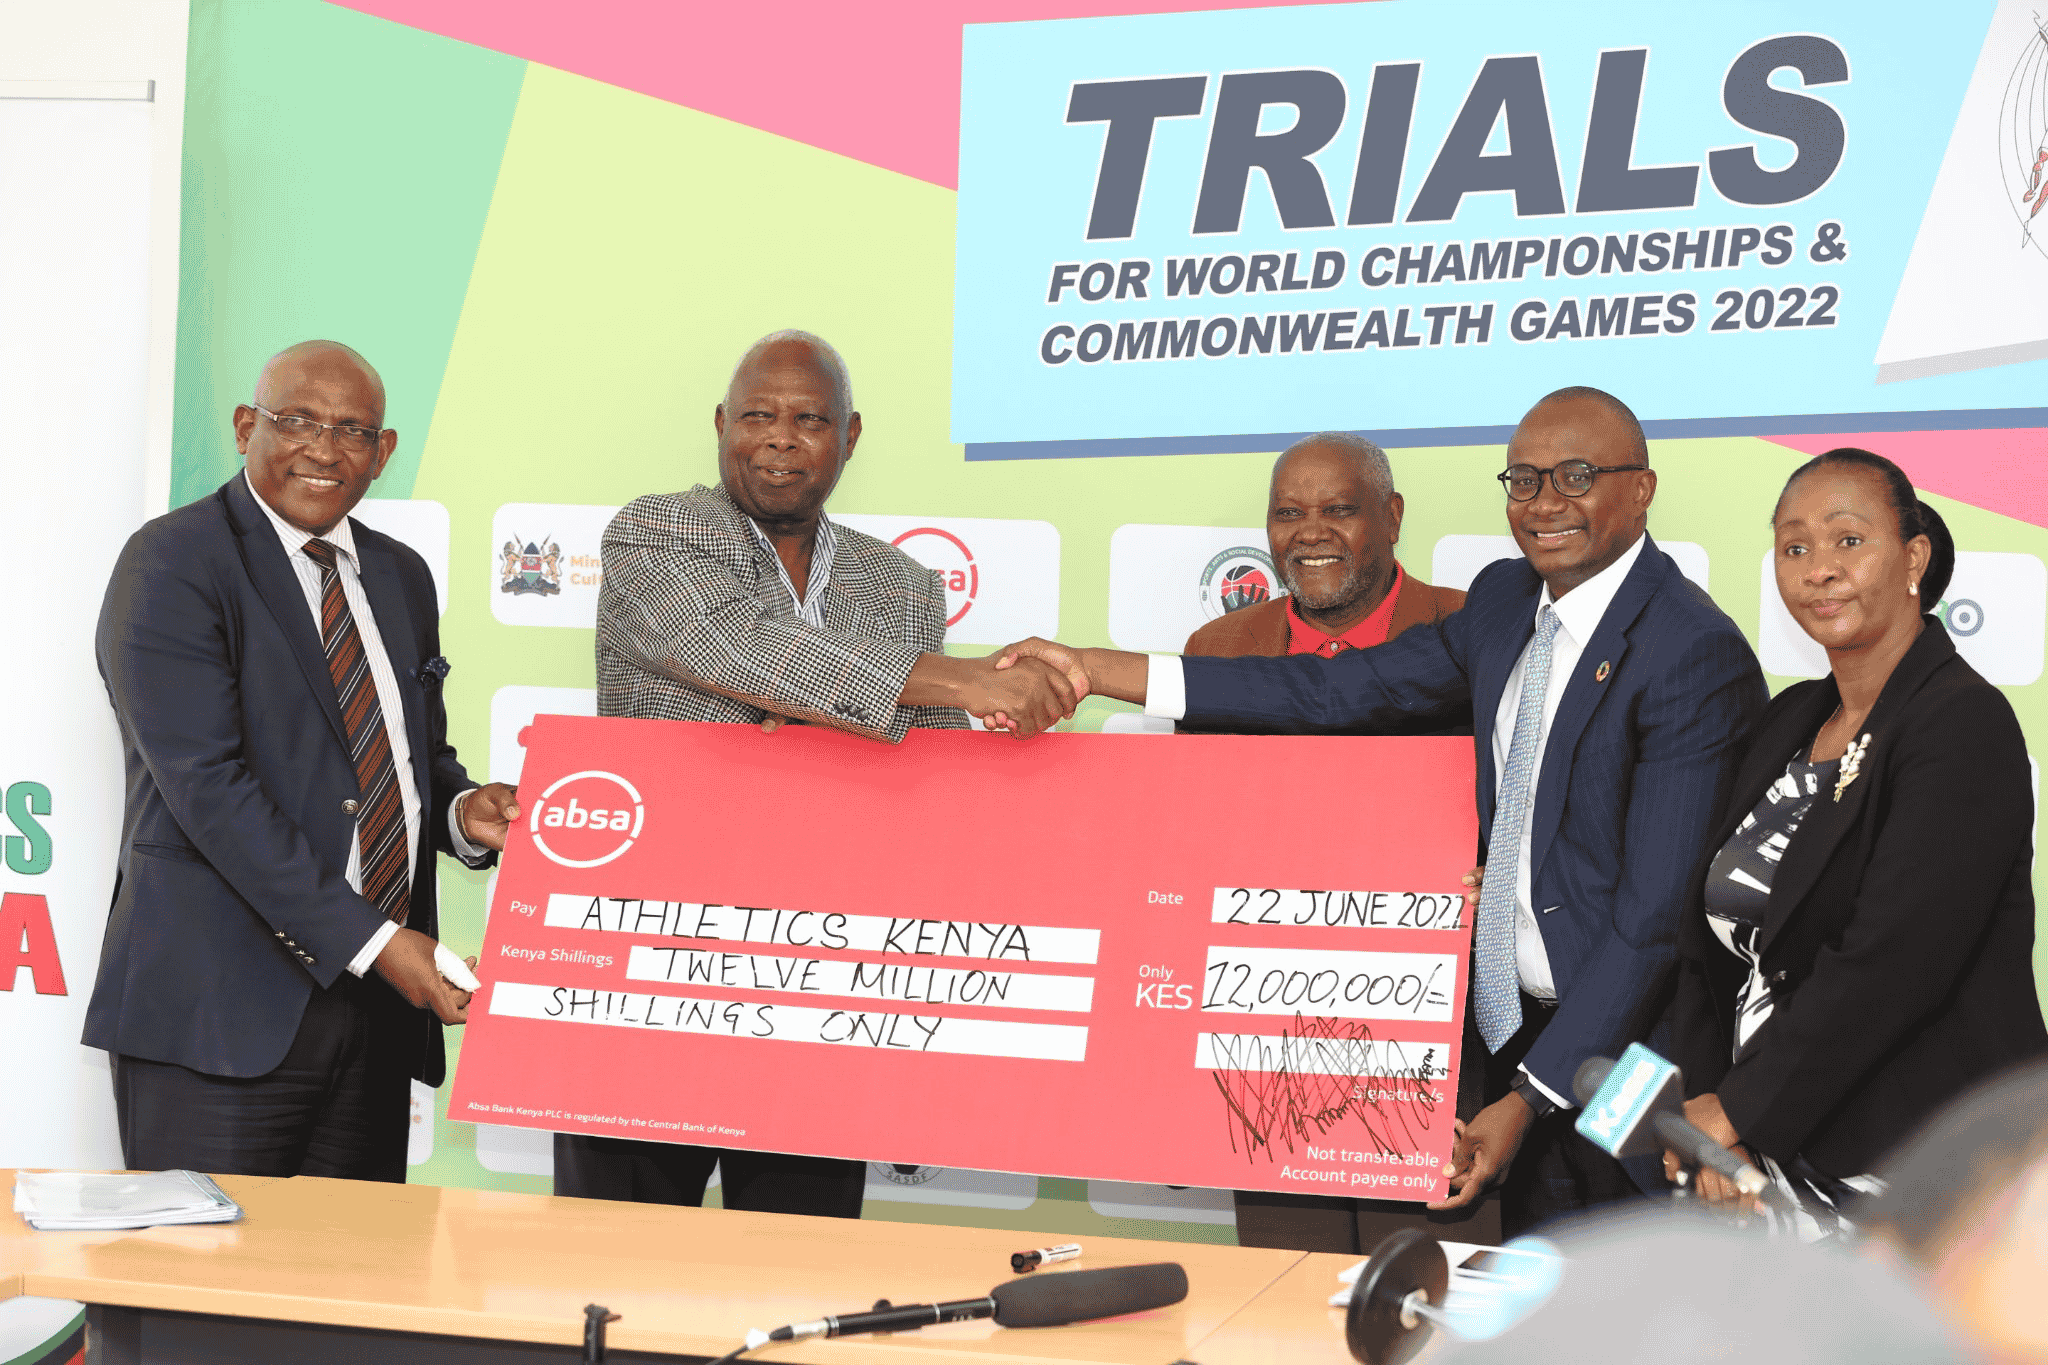 Two big sponsors boost Athletics Kenya with KES 15 million for this weekend’s national trials